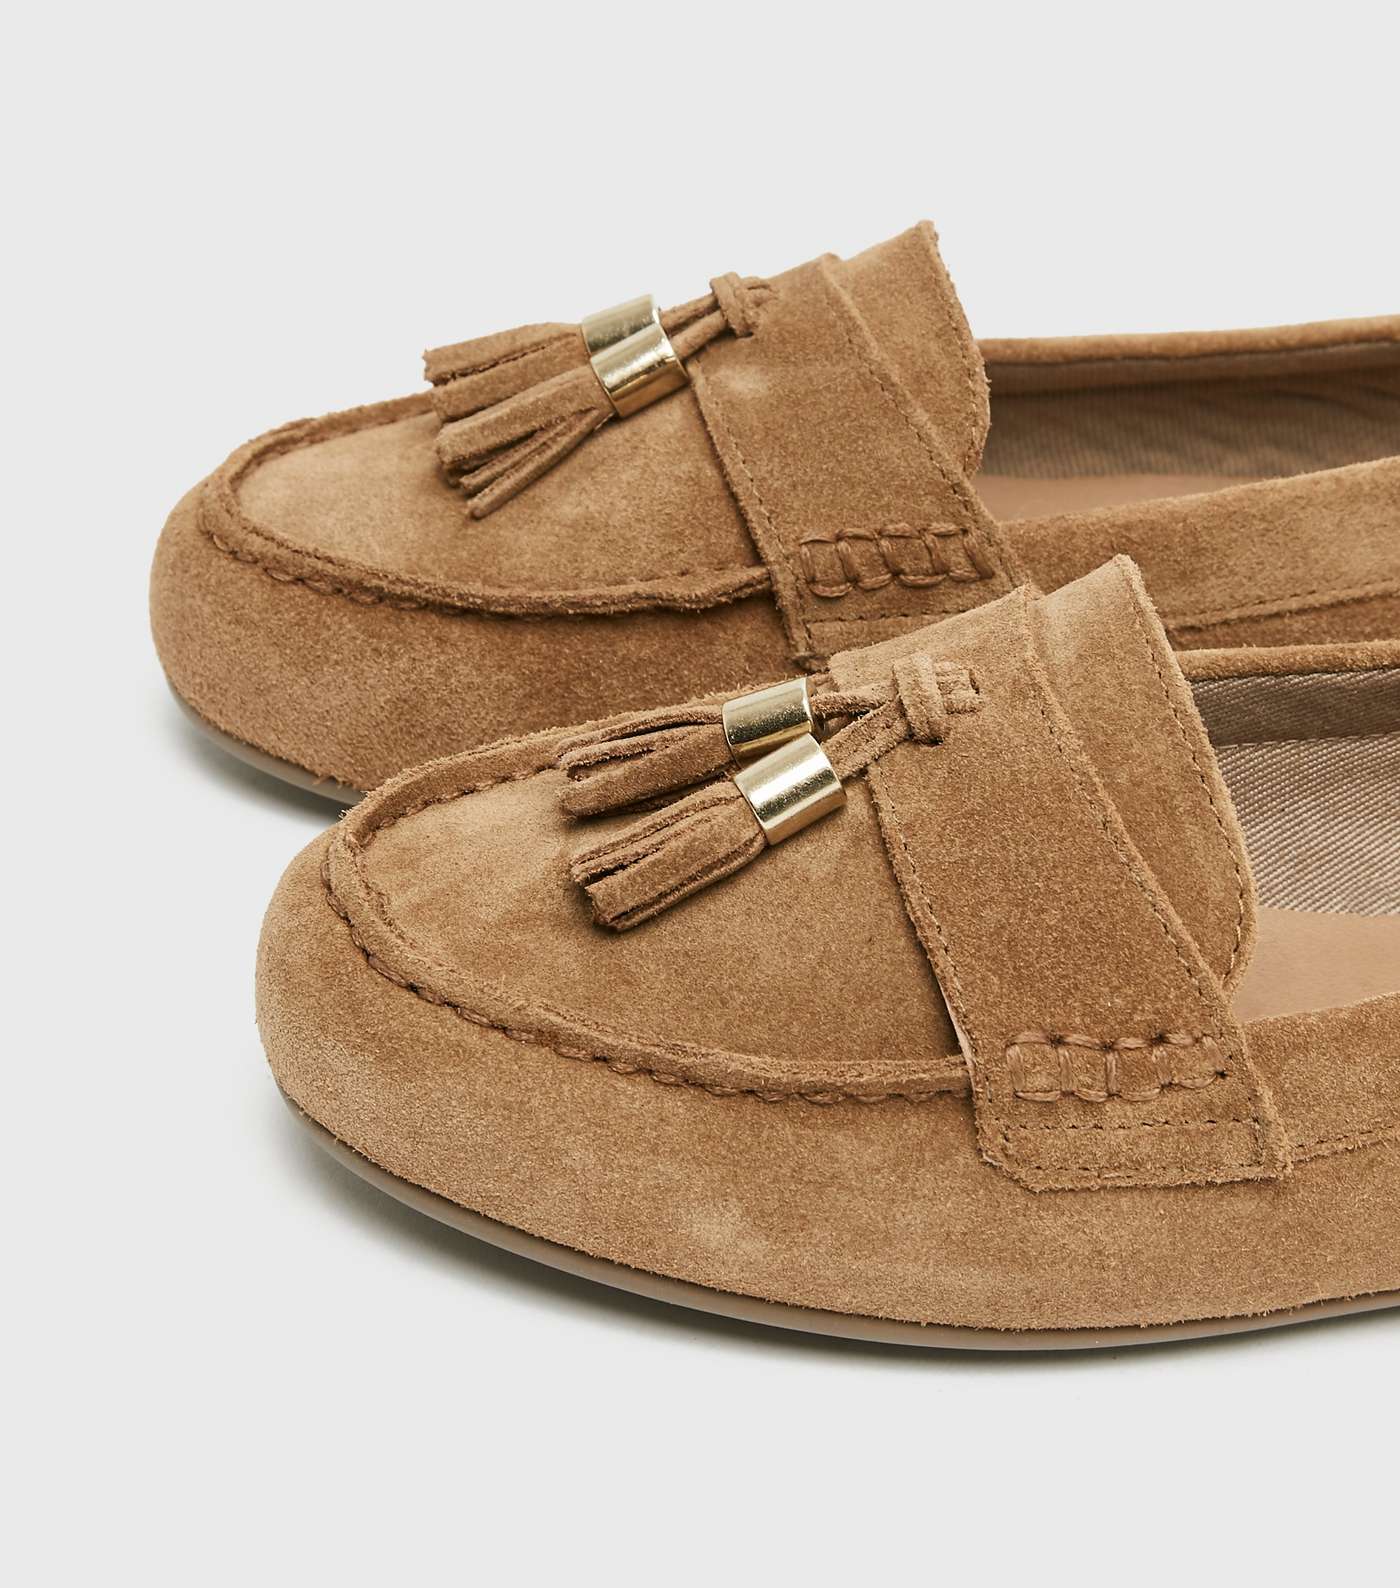 Wide Fit Tan Suede Tassel Trim Loafers Image 3